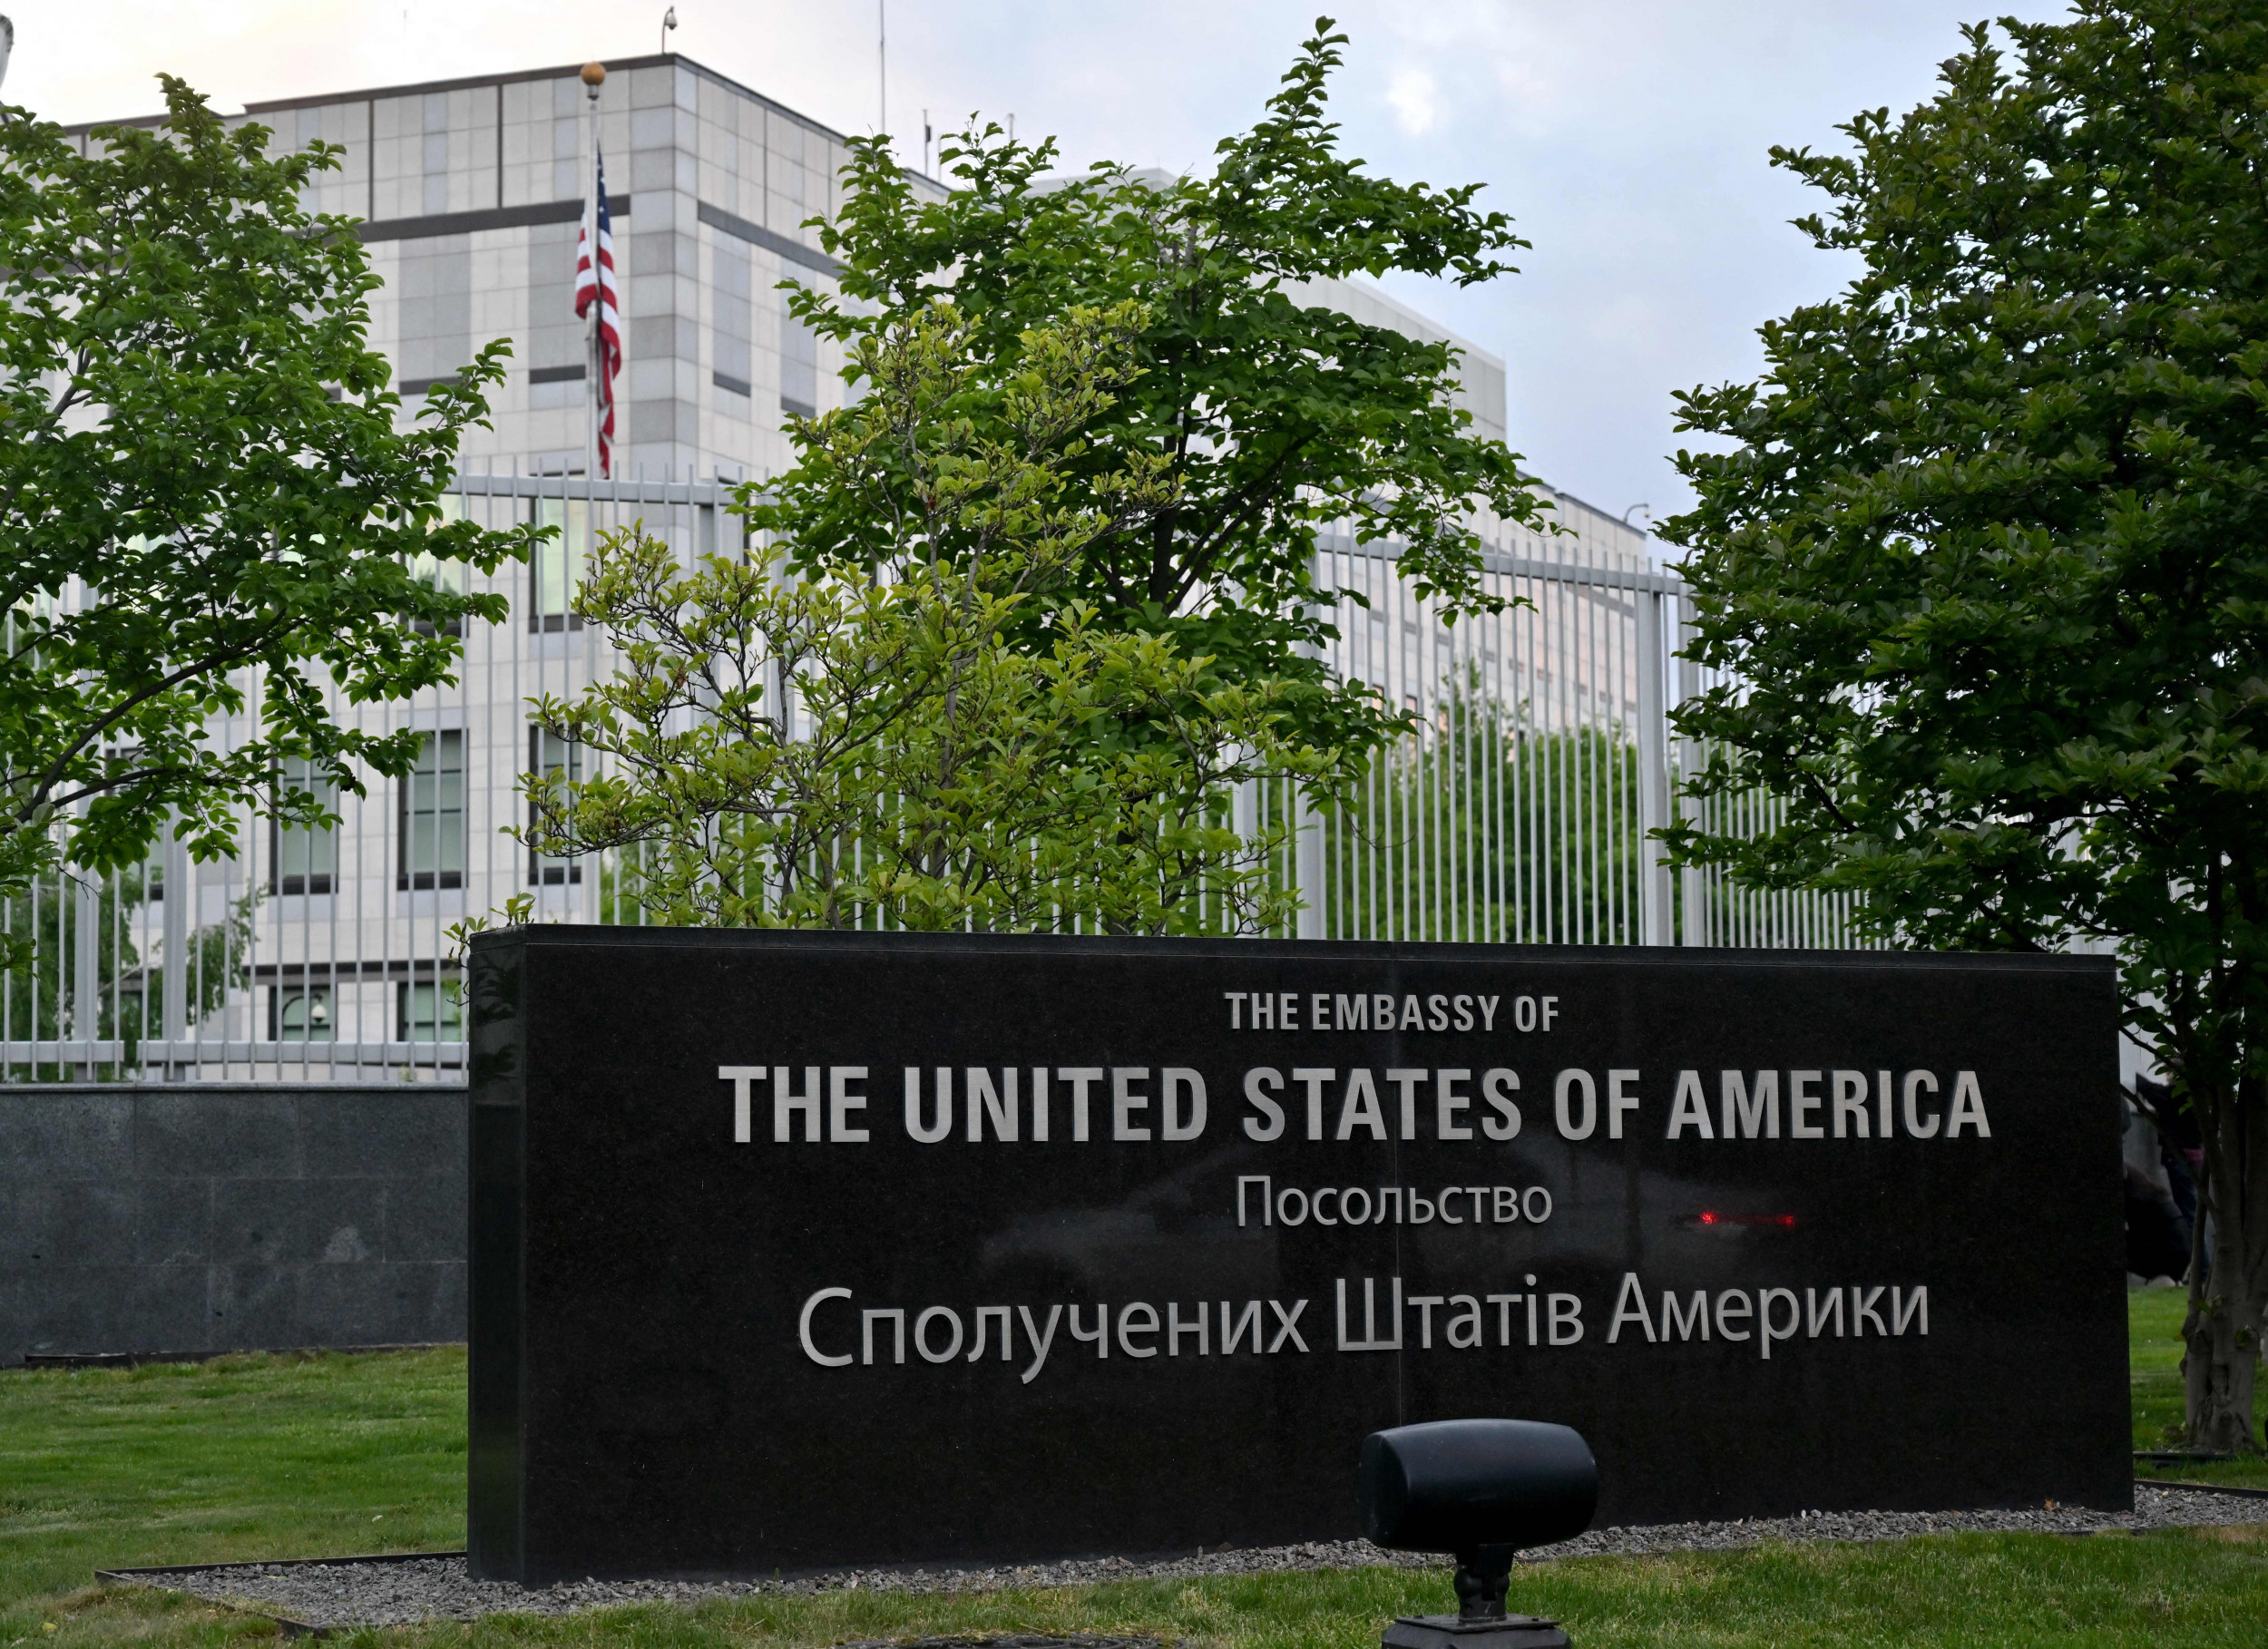 Russian Mp Urges Attack On U S Embassy In Kyiv For Supplying Ukraine Arms